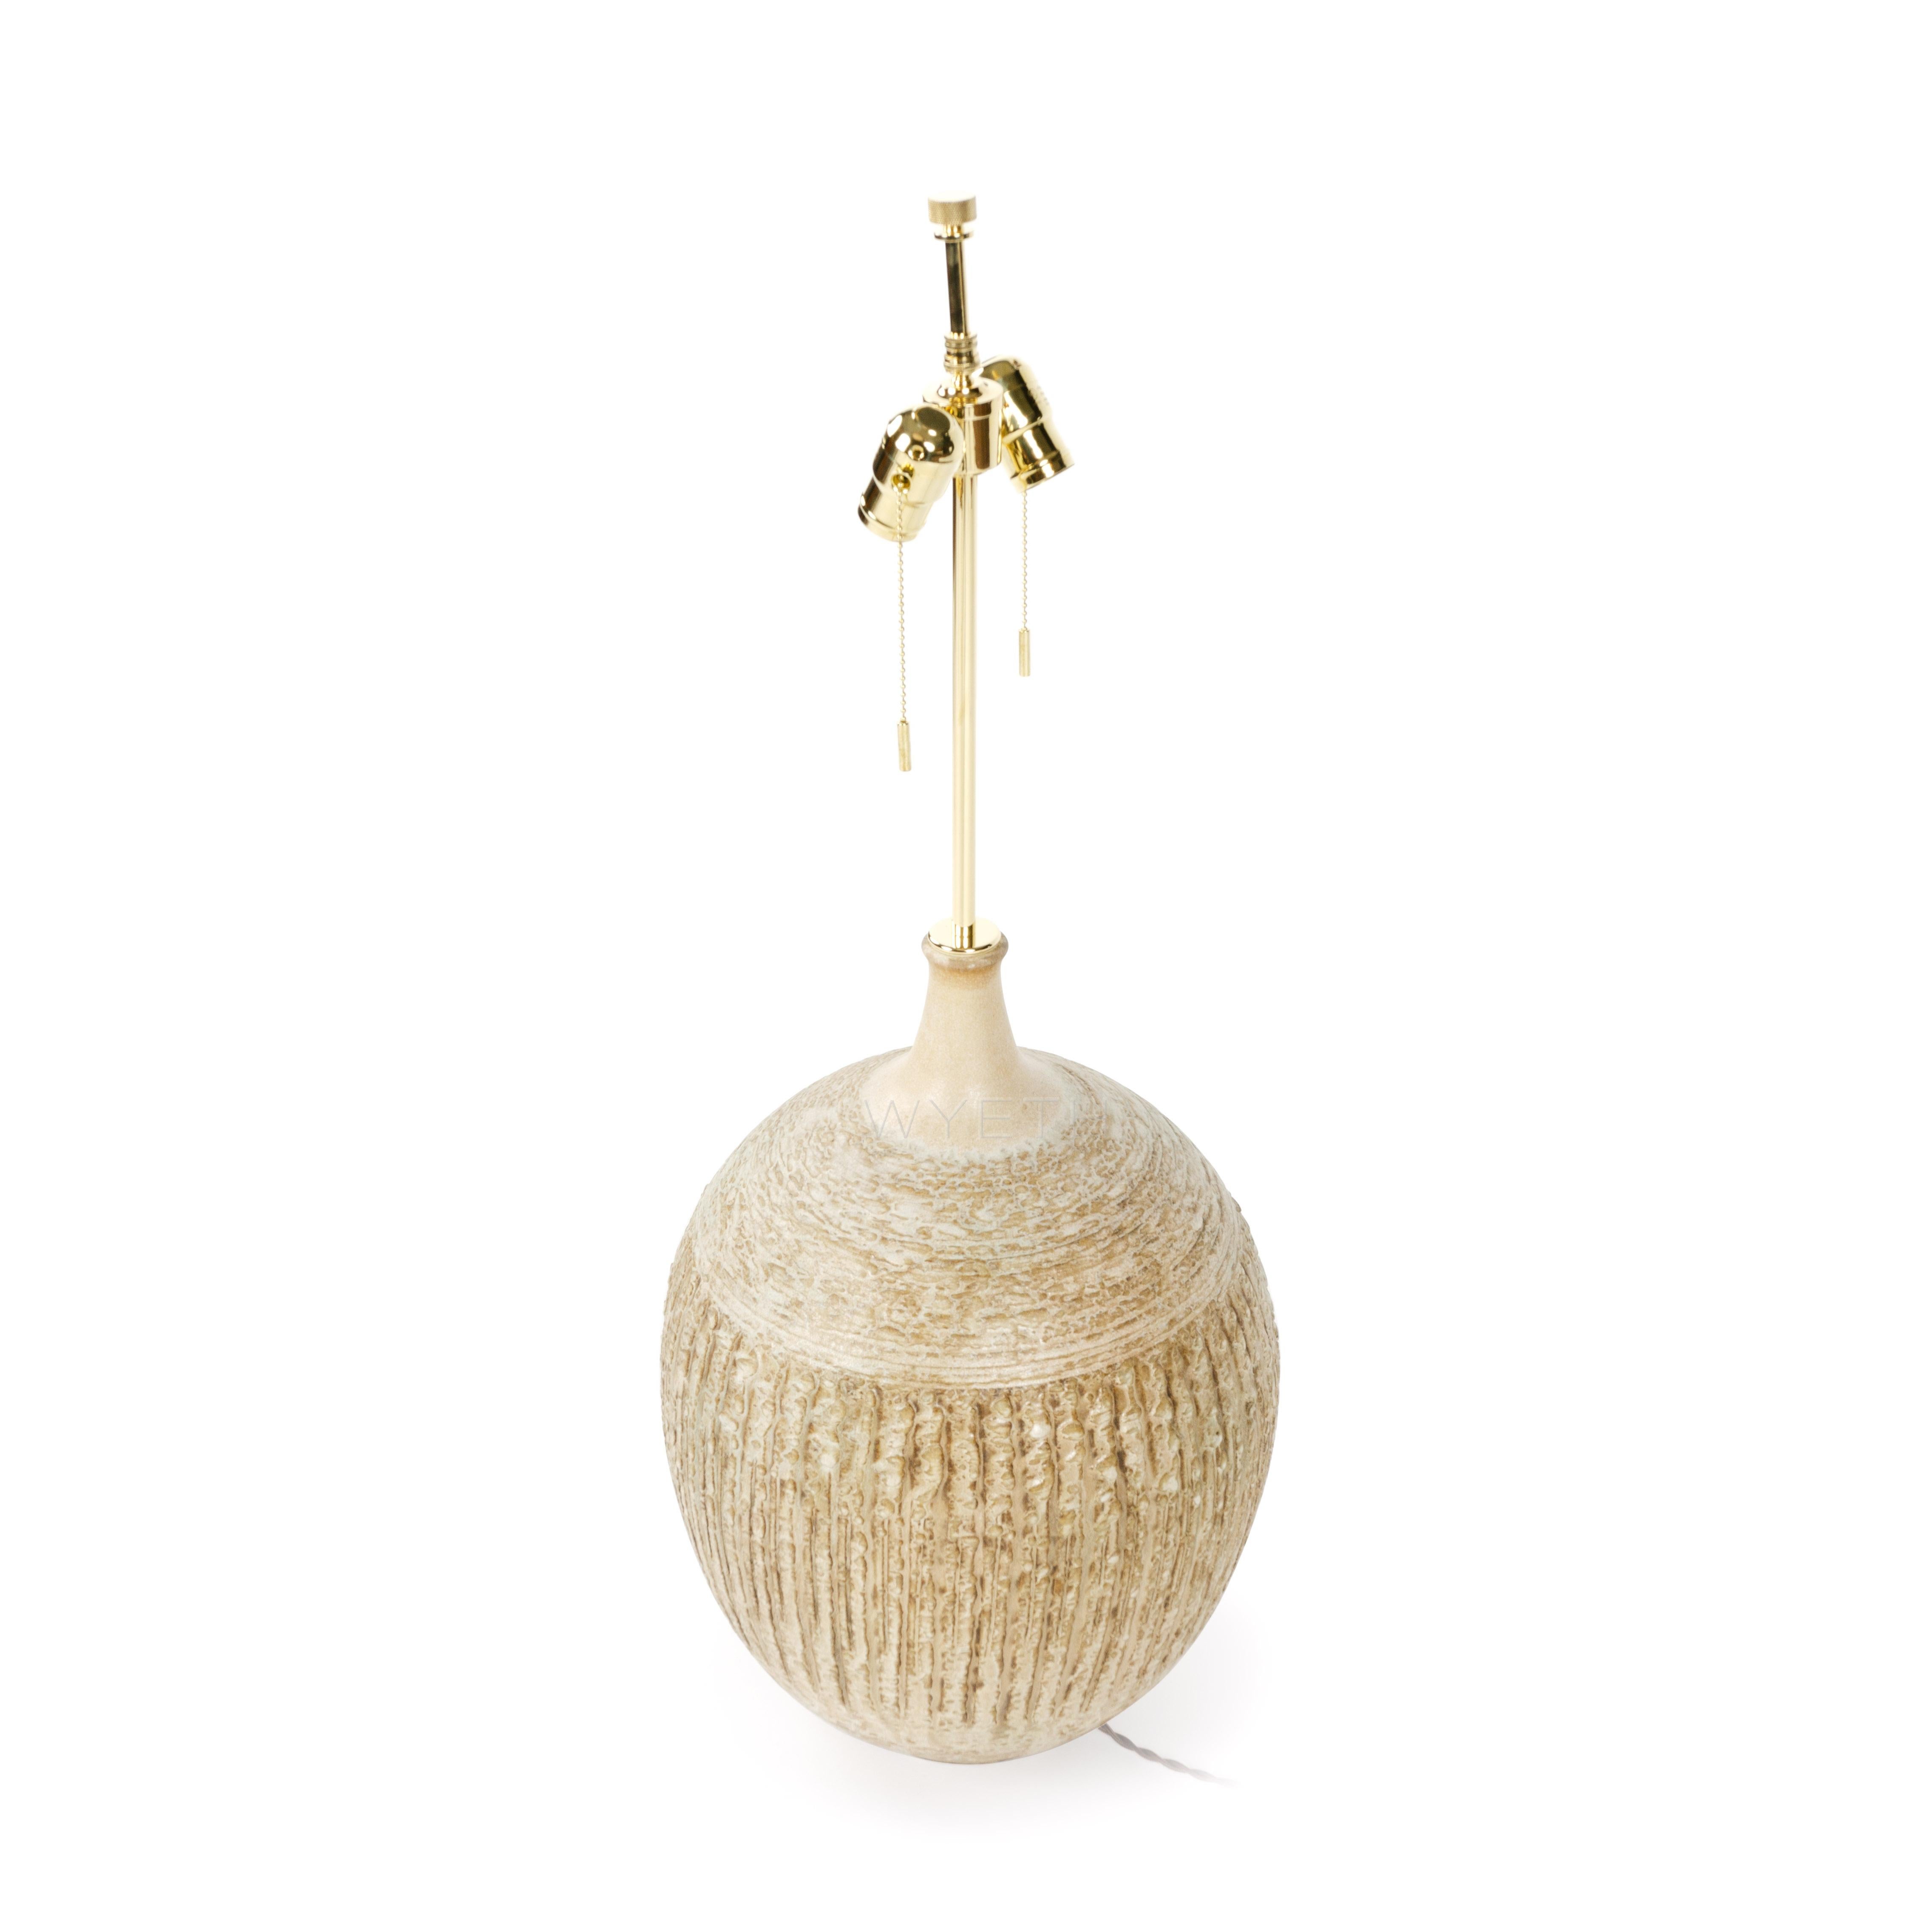 A hand-thrown bulbous sculpted ceramic lamp in a semi lustrous ochre glaze.
Marked with the Design Technics Cypher.